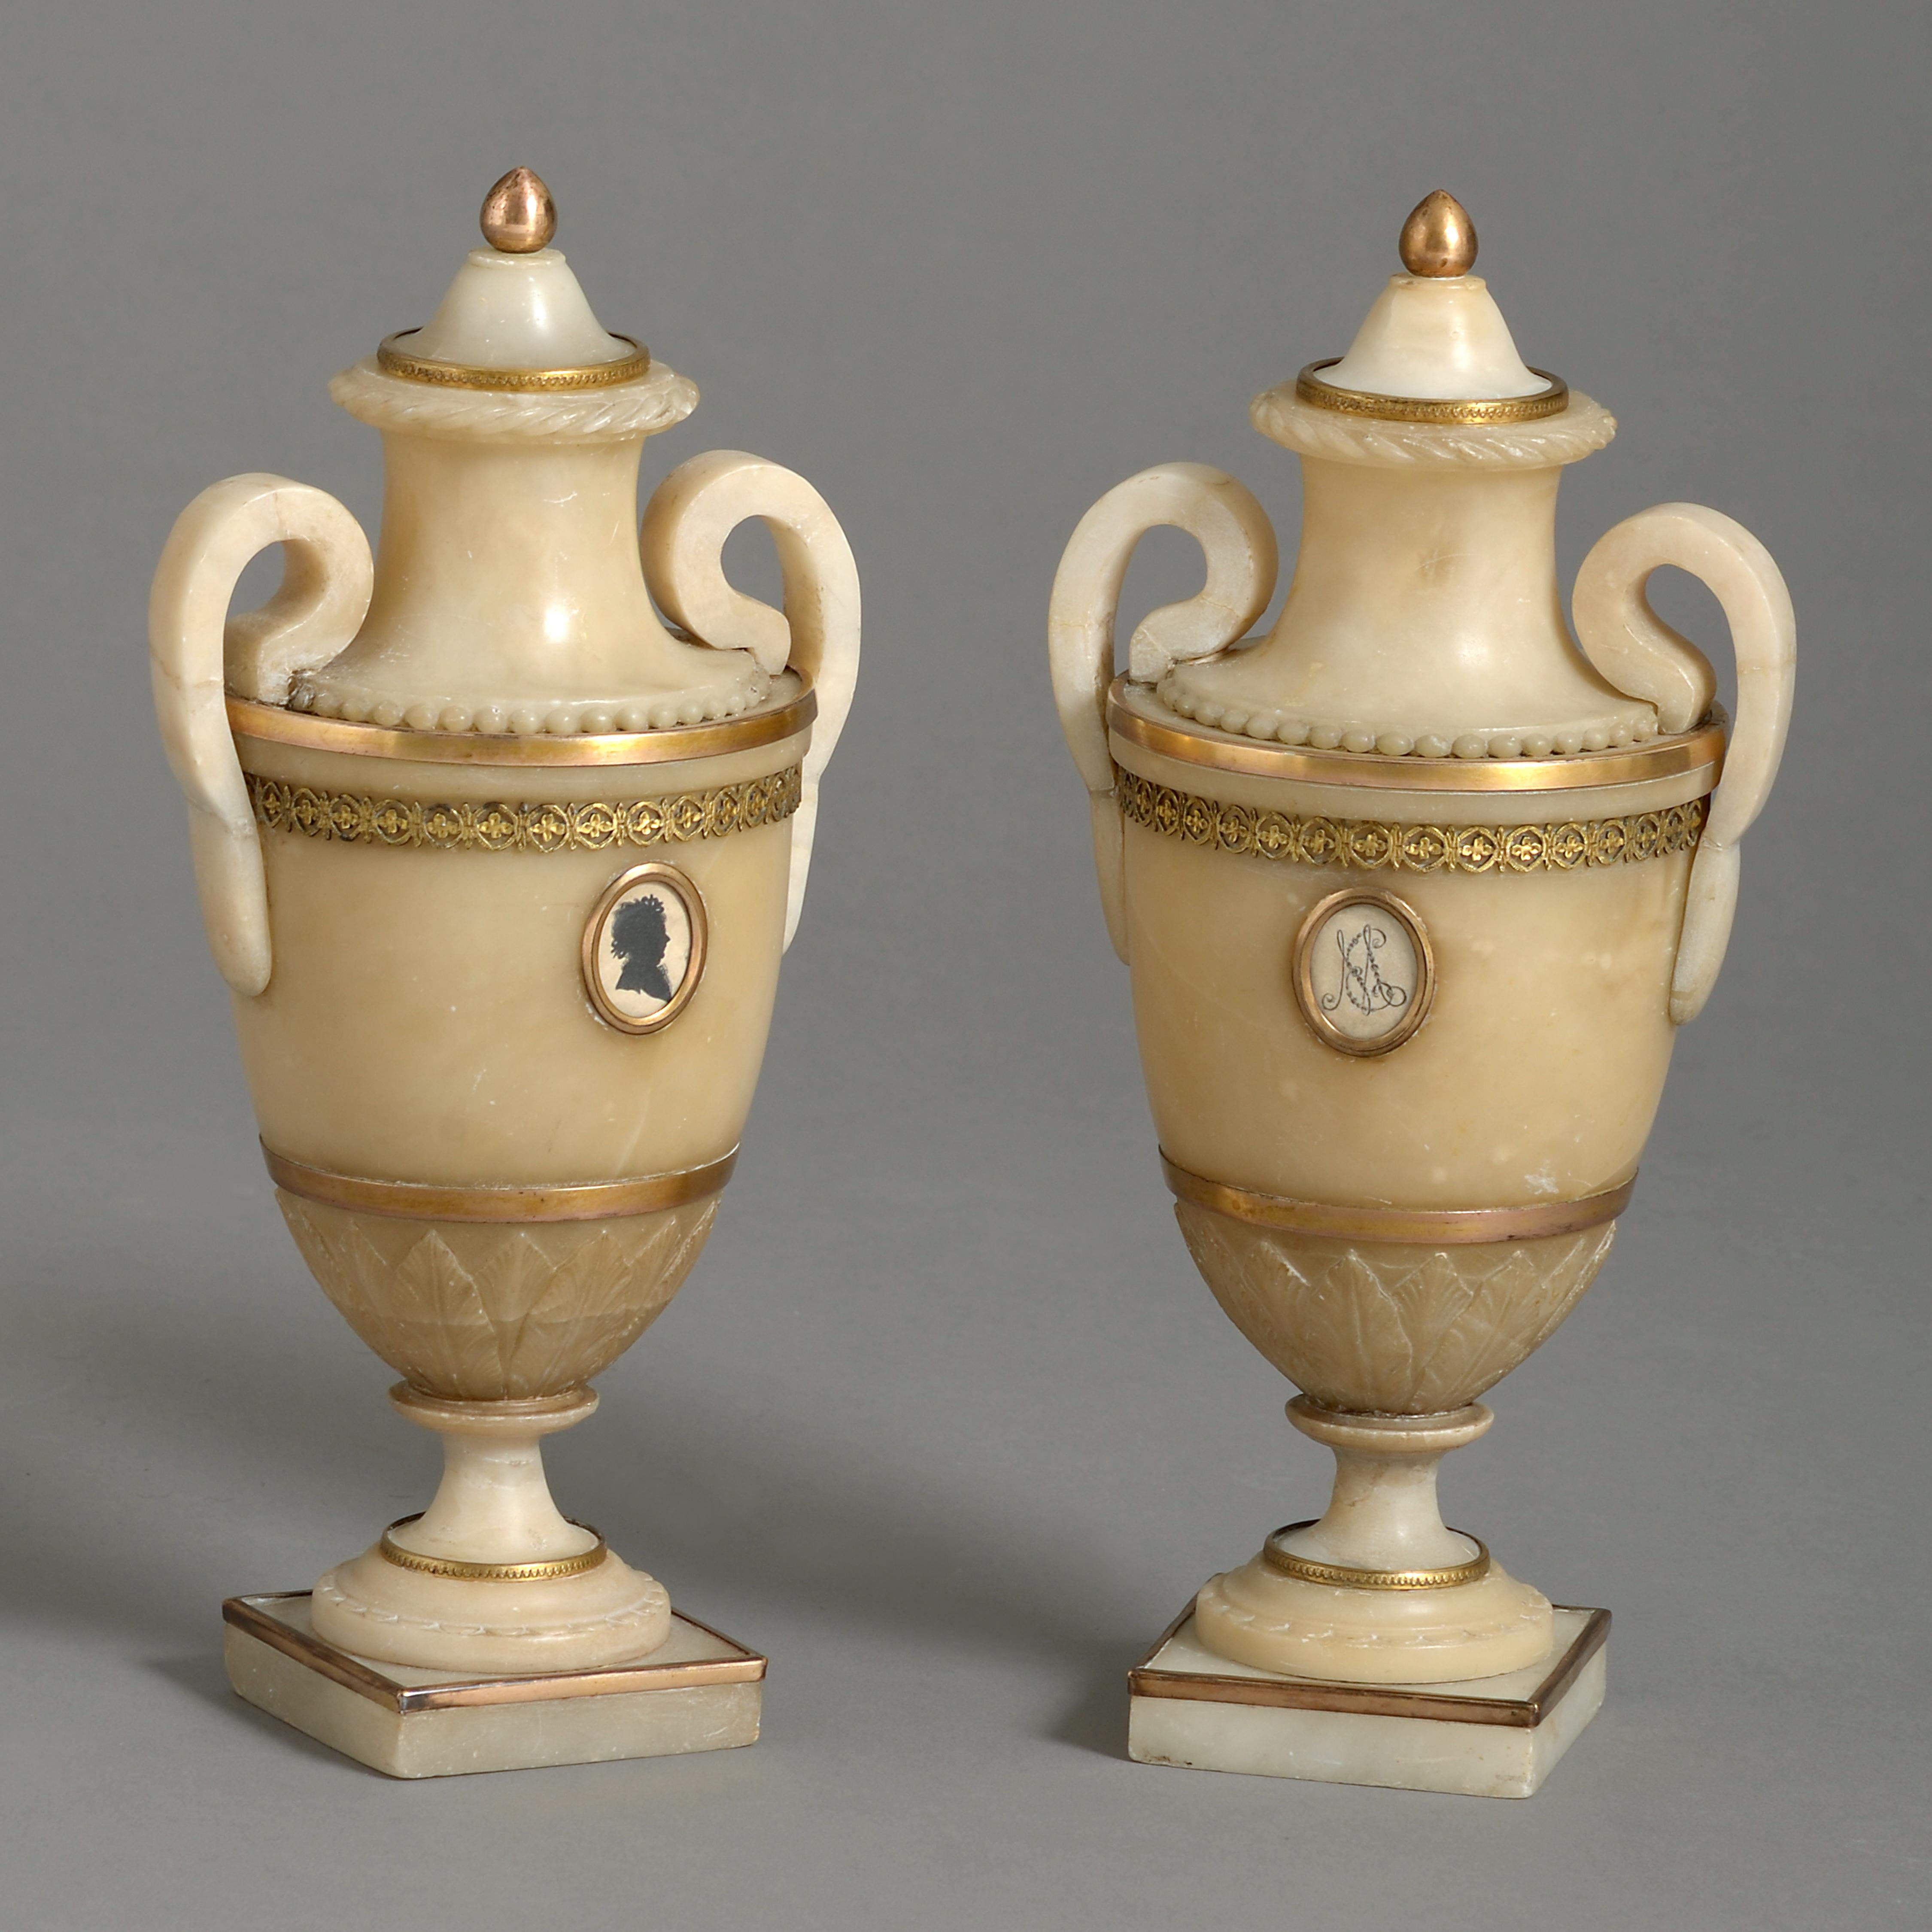 A fine pair of George III Ormolu-mounted Derbyshire alabaster urns, circa 1780.
Each with a glazed oval plaque, one containing a silhouette, the other with a cypher. Restorations to the socles and handles.